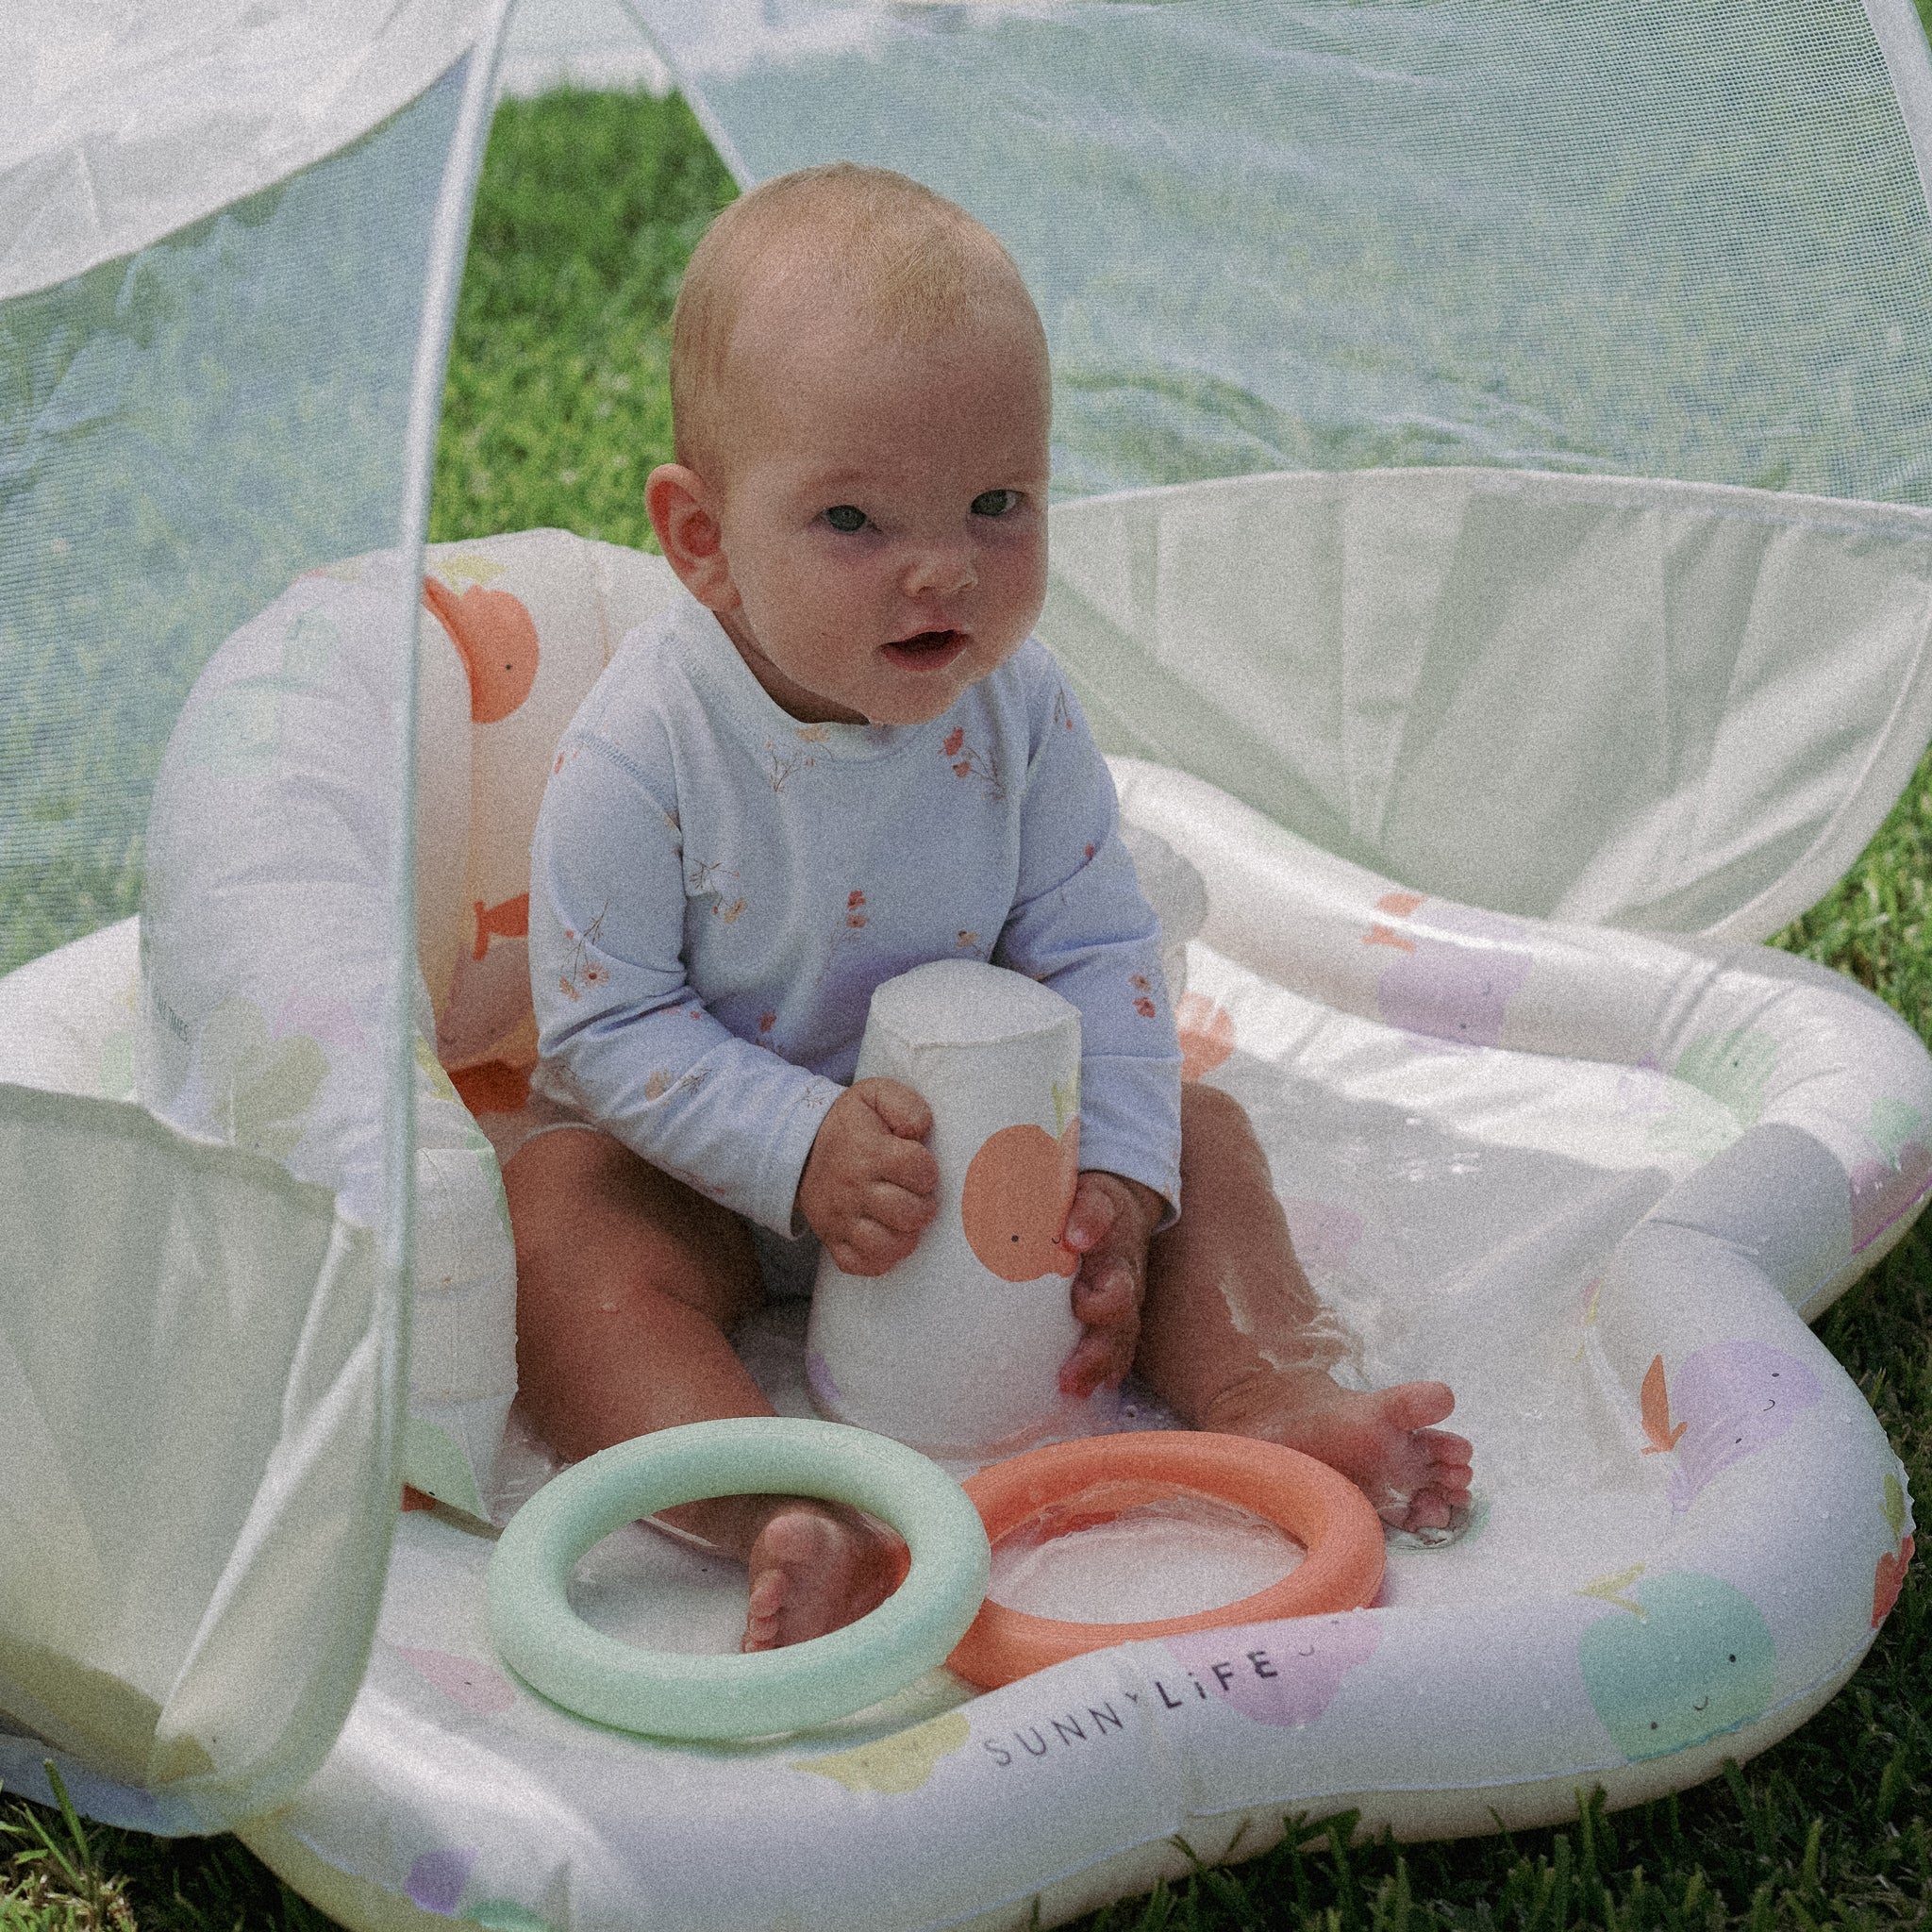 Baby Playmat with Shade | Apple Sorbet Multi